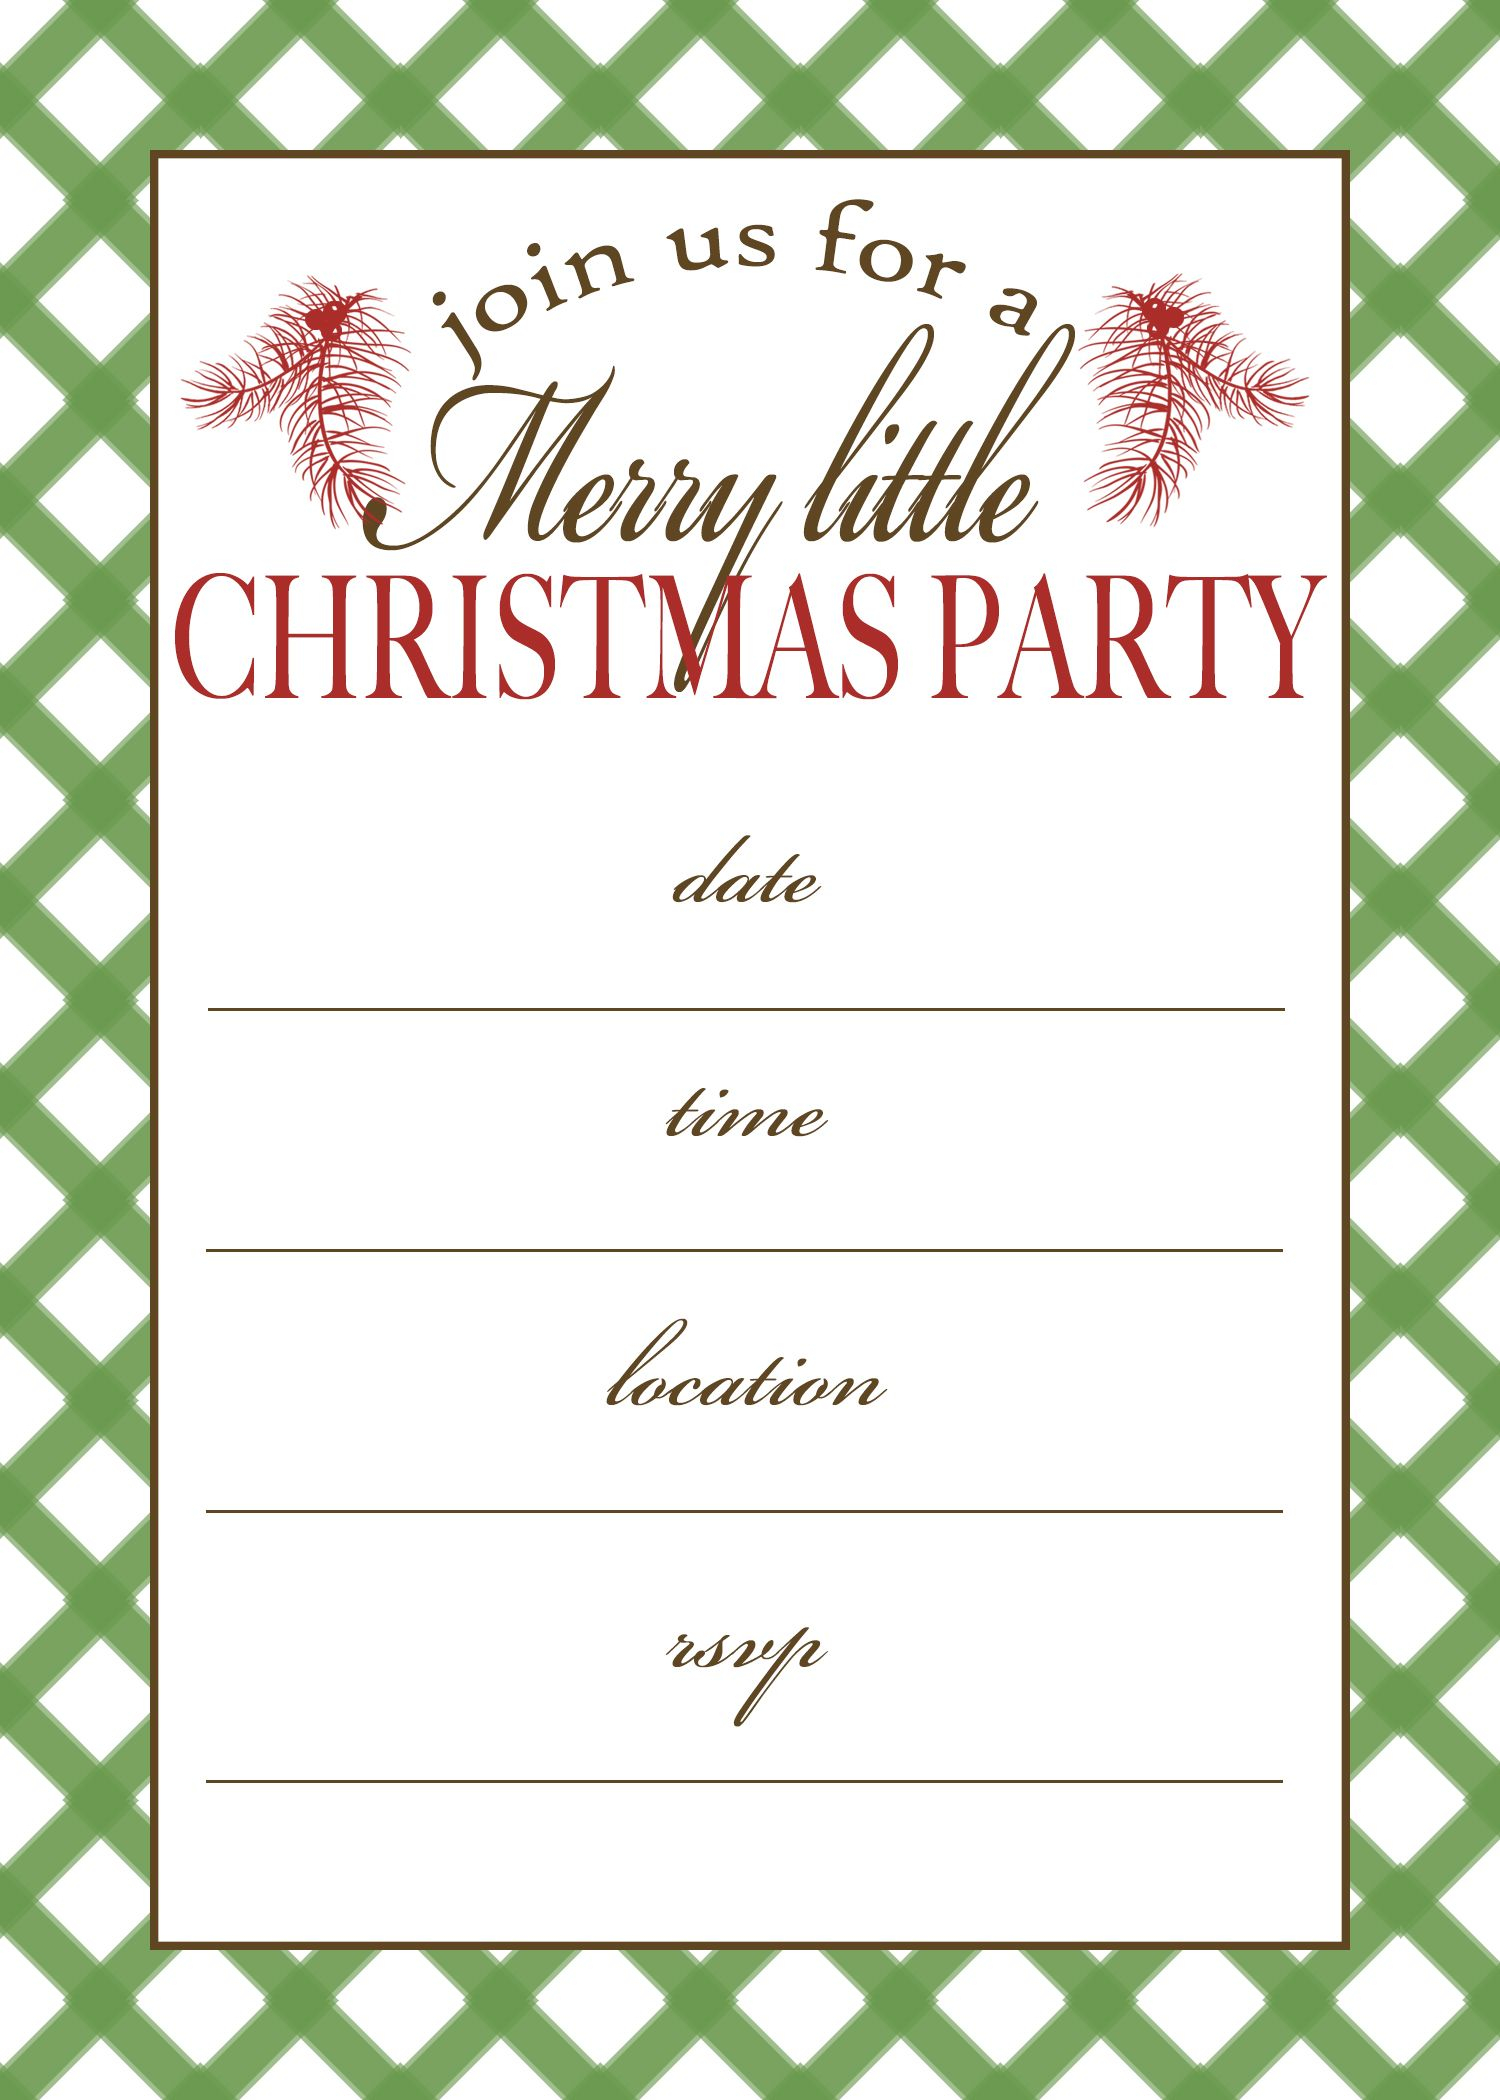 Free Printable Christmas Party Invitation Crafts Free Christmas pertaining to dimensions 1500 X 2100